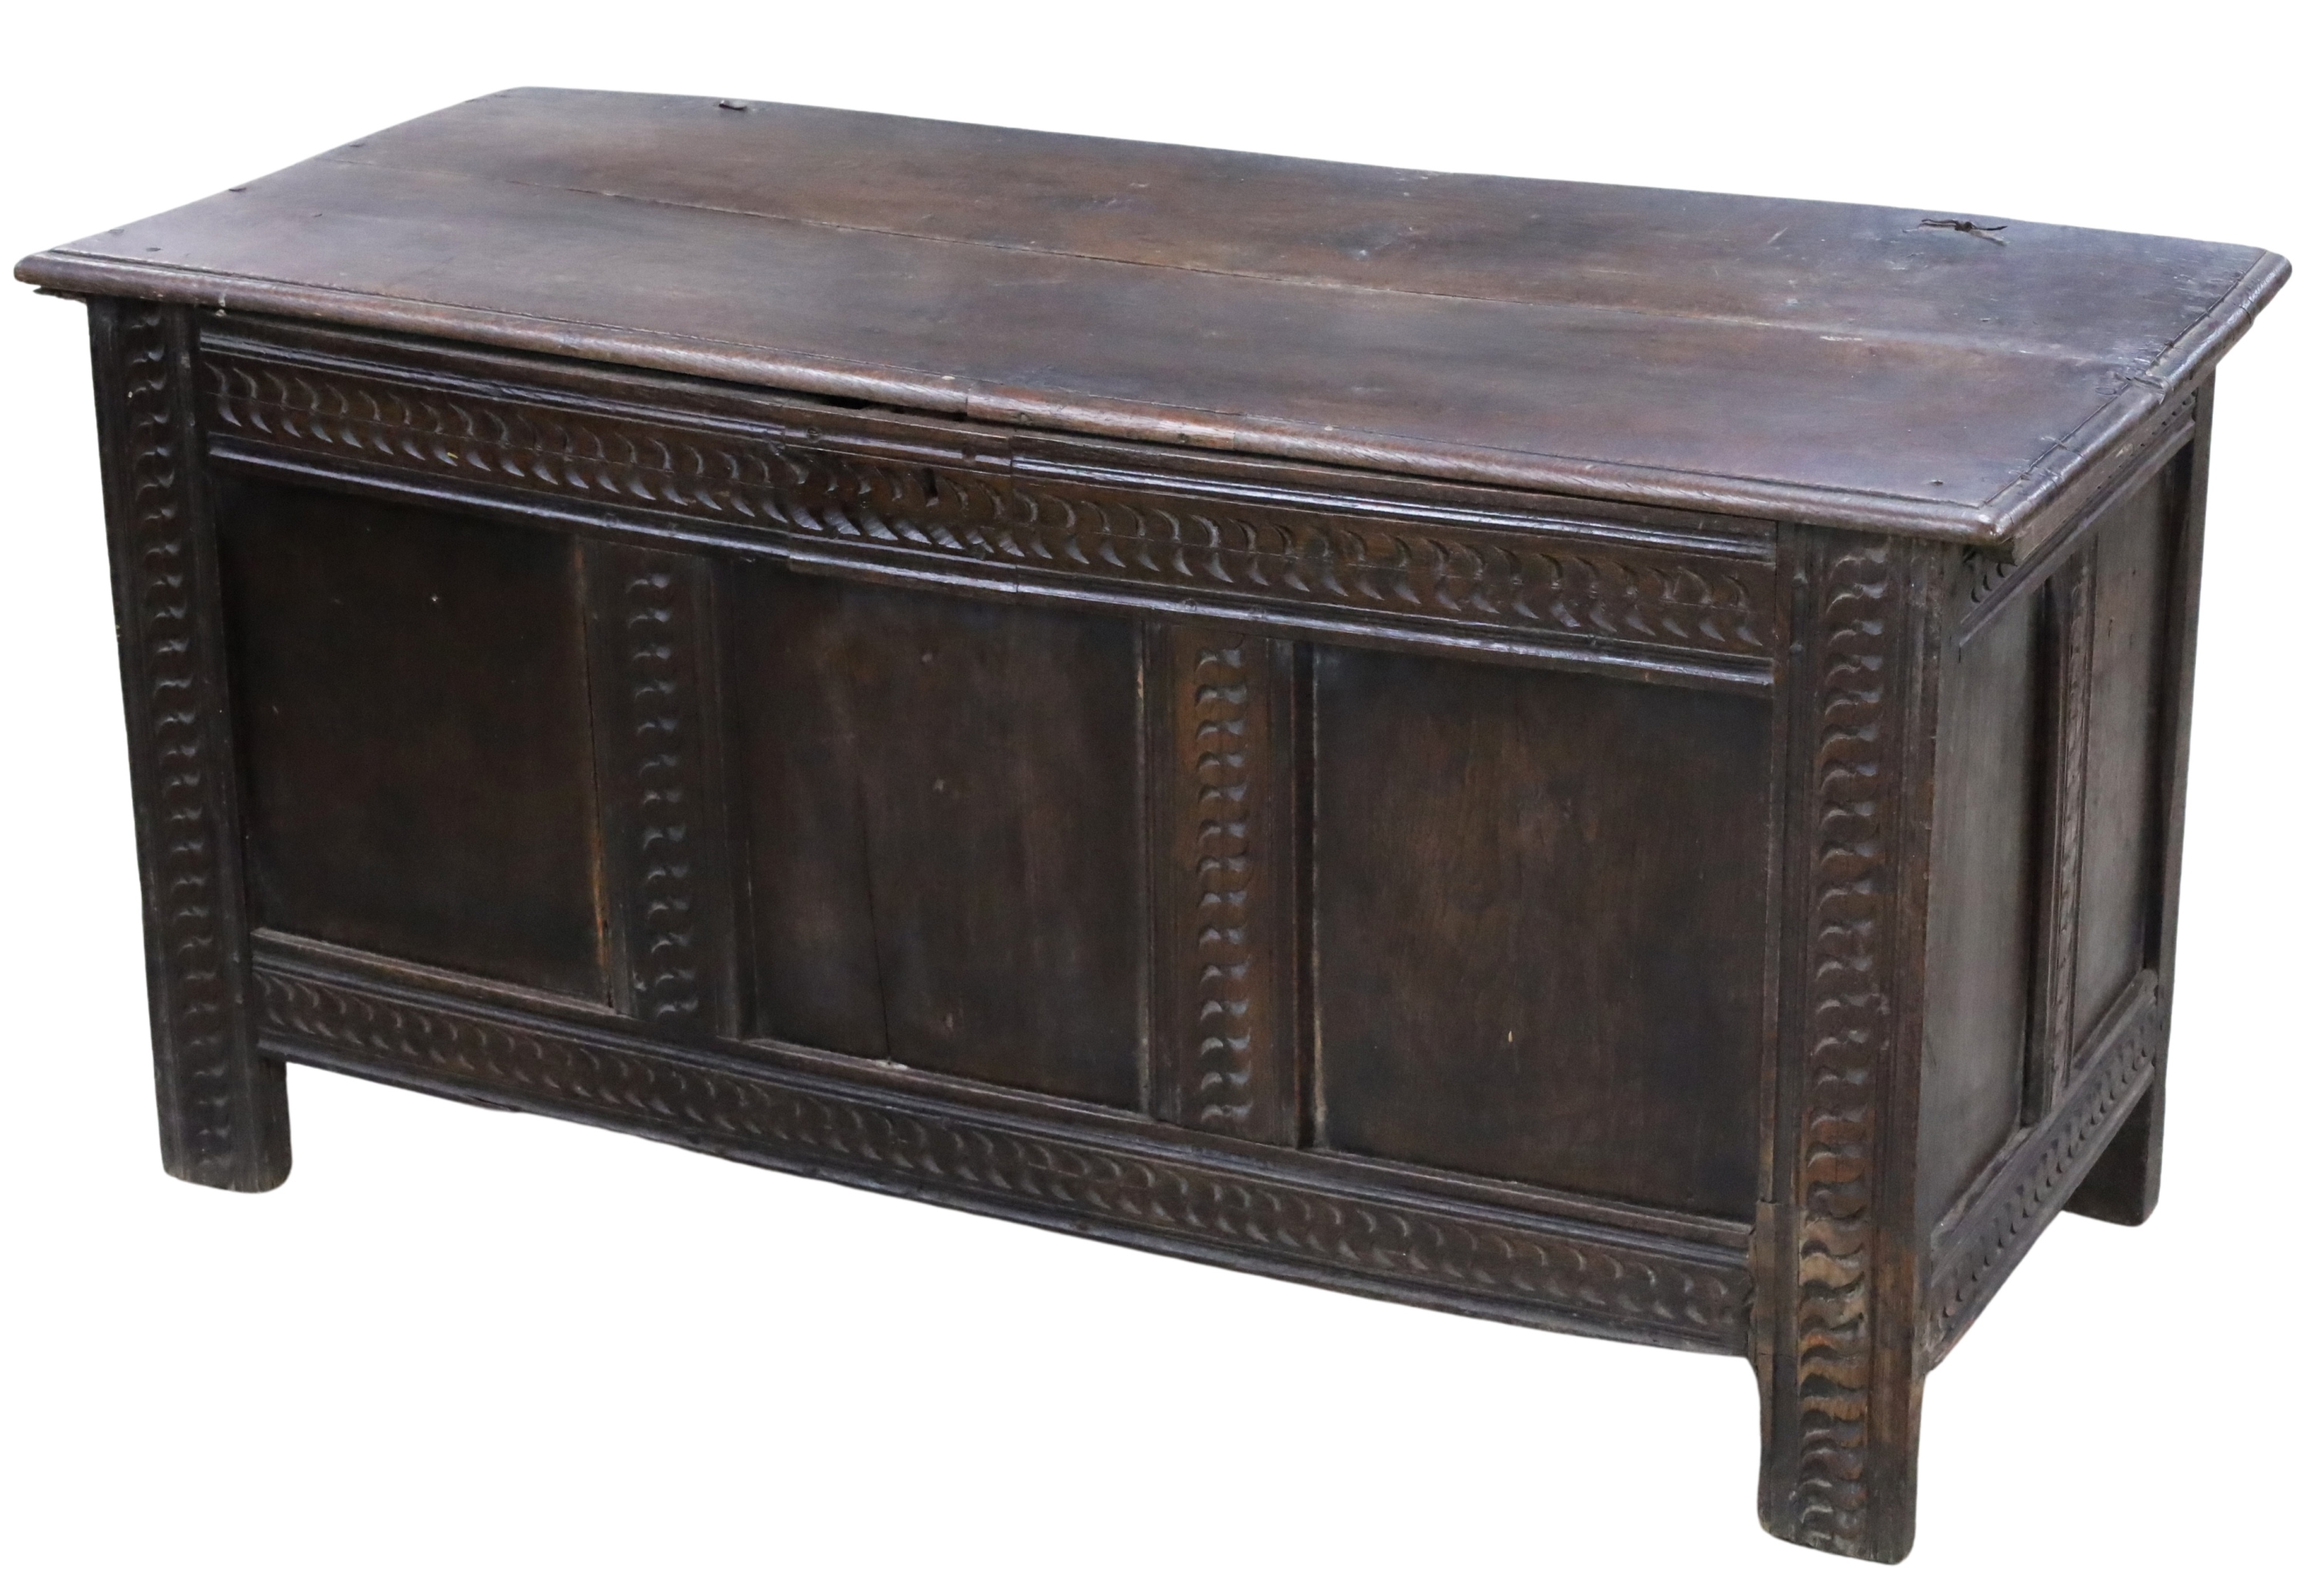 EARLY ENGLISH JACOBEAN CARVED OAK 2a5817